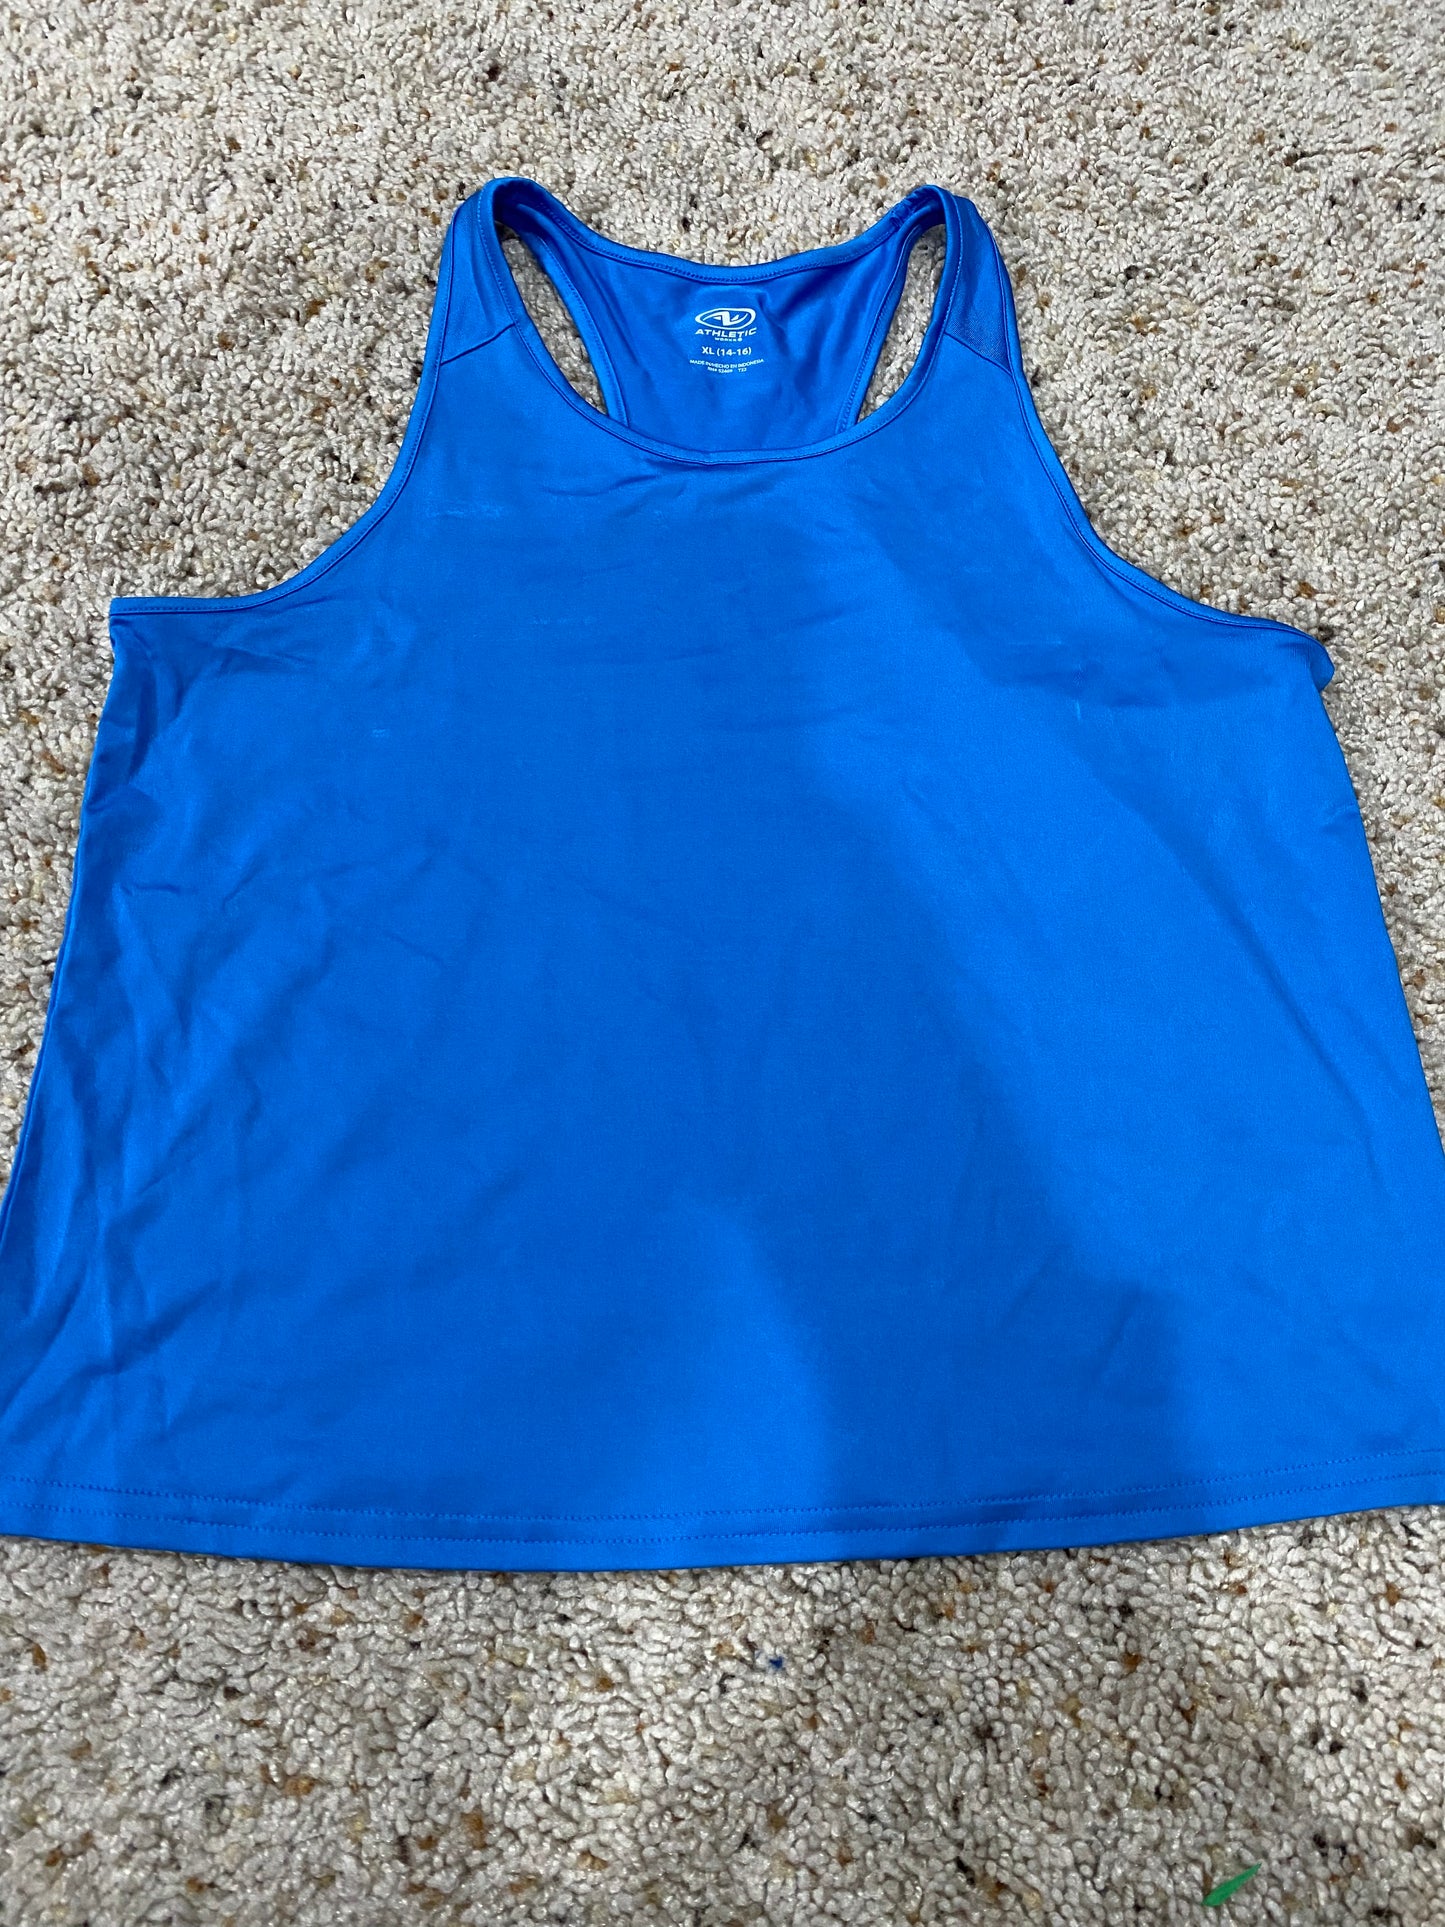 Girls size 14-16 athletic tank too